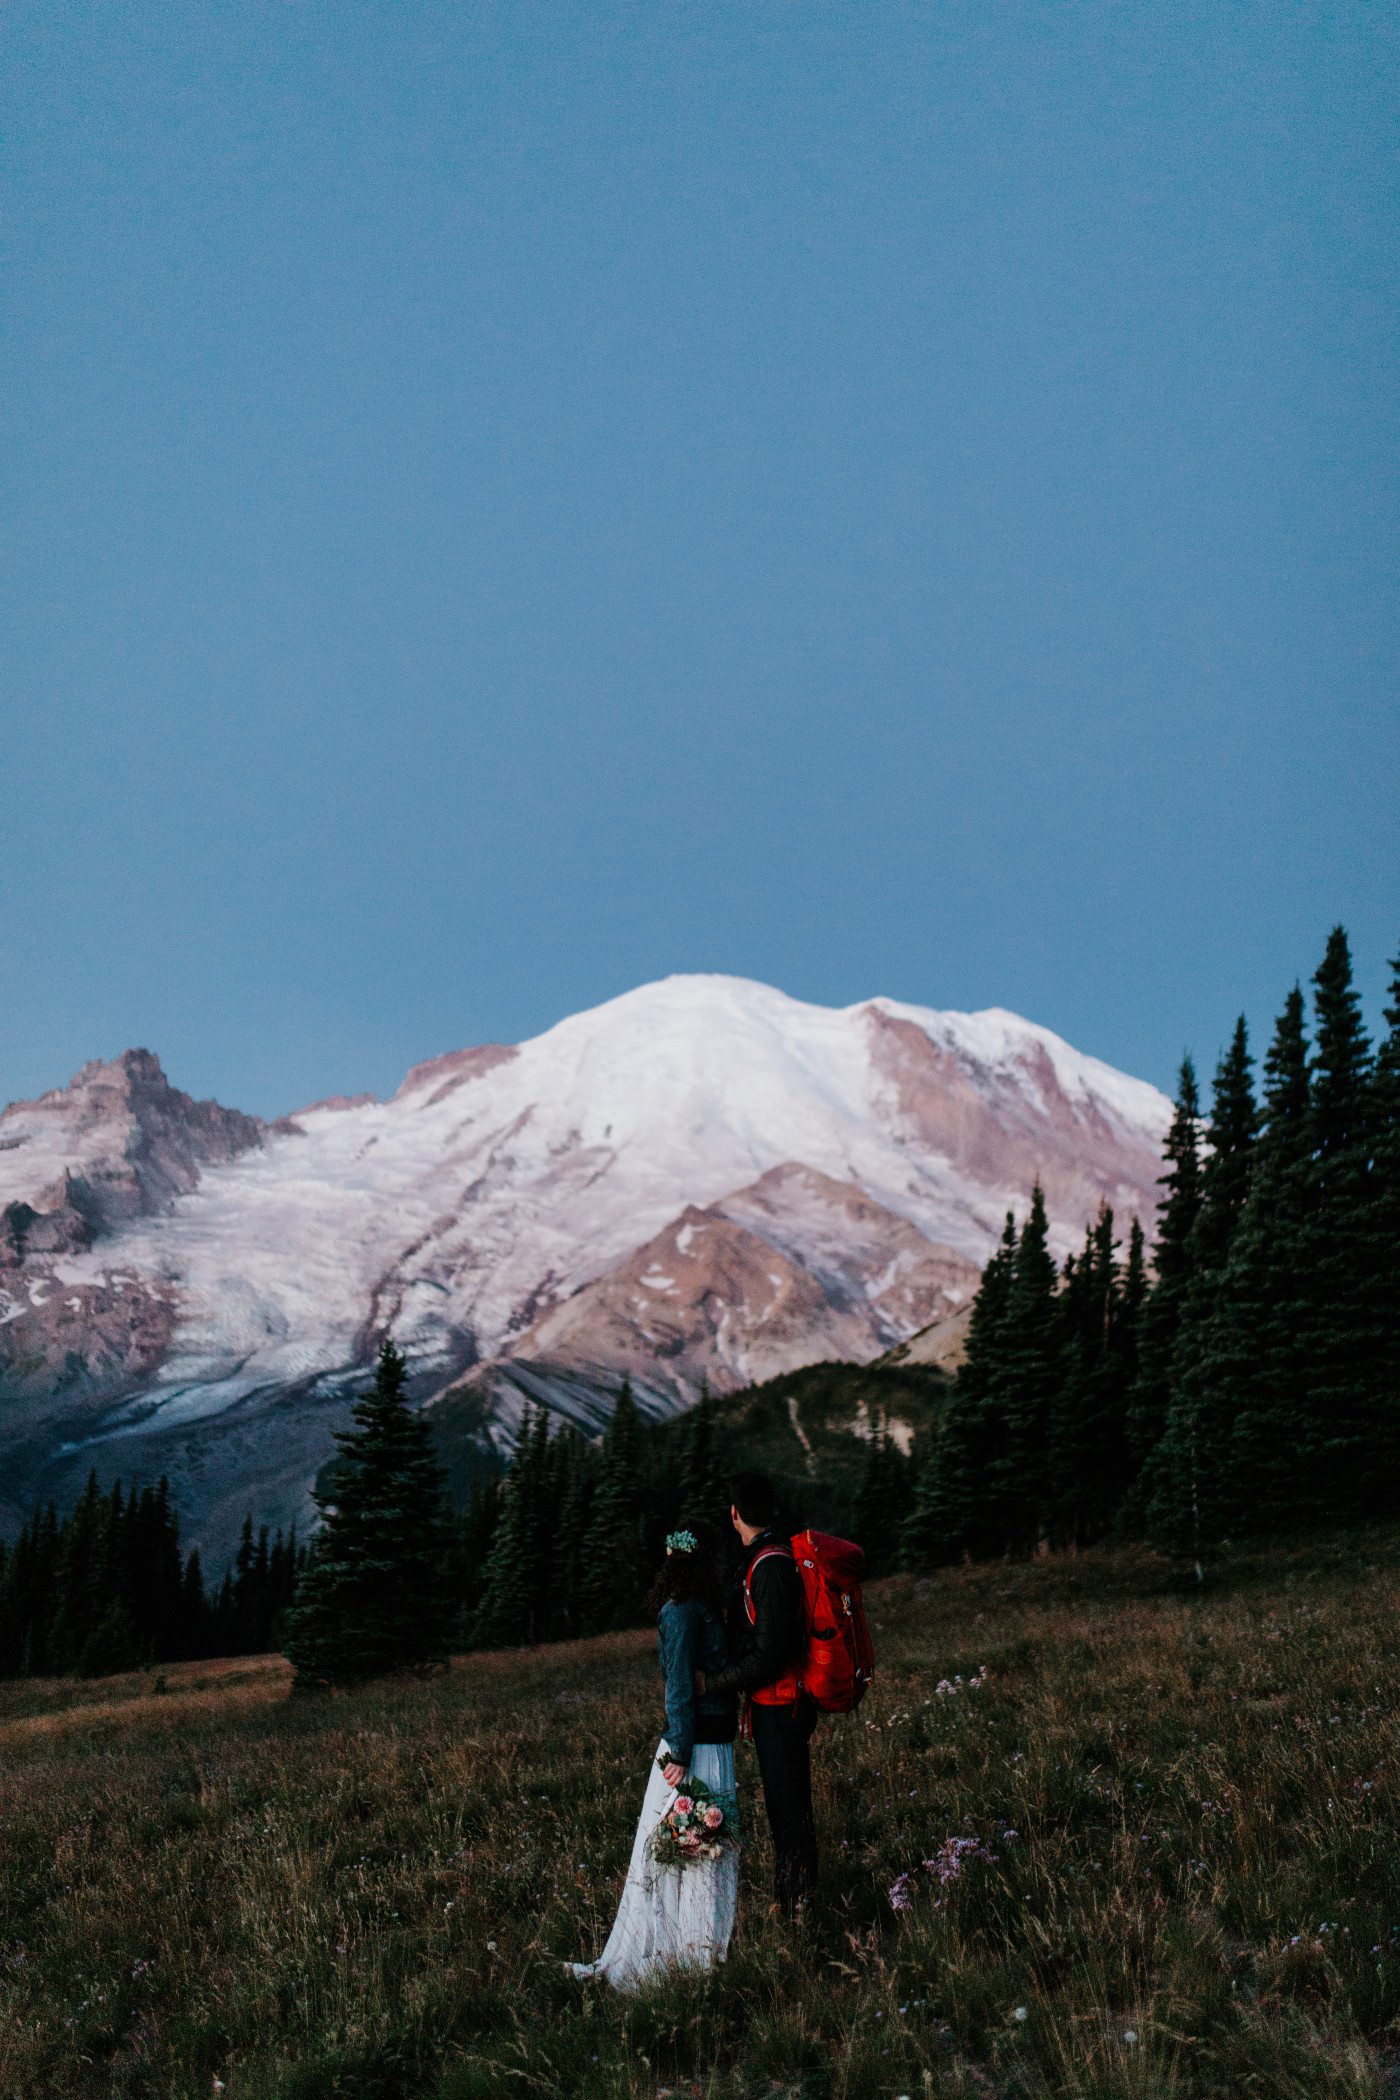 Tasha and Chad look up at the mountain from a field. Elopement photography at Mount Rainier by Sienna Plus Josh.